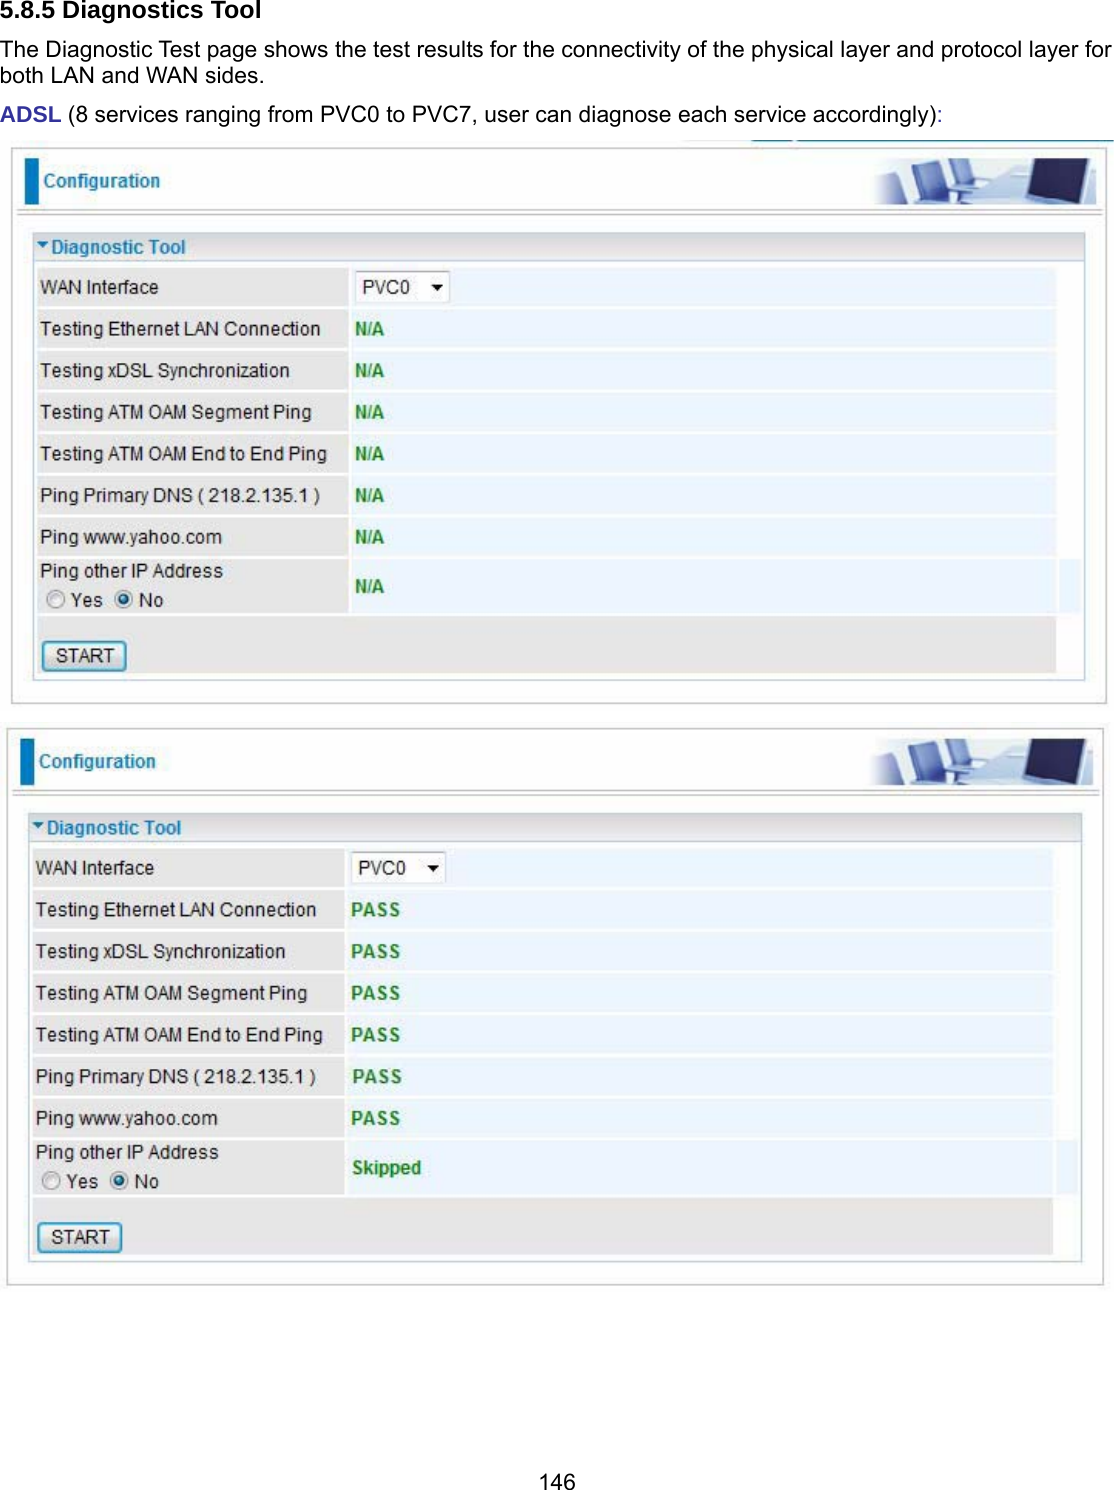 146 5.8.5 Diagnostics Tool The Diagnostic Test page shows the test results for the connectivity of the physical layer and protocol layer for both LAN and WAN sides. ADSL (8 services ranging from PVC0 to PVC7, user can diagnose each service accordingly):       